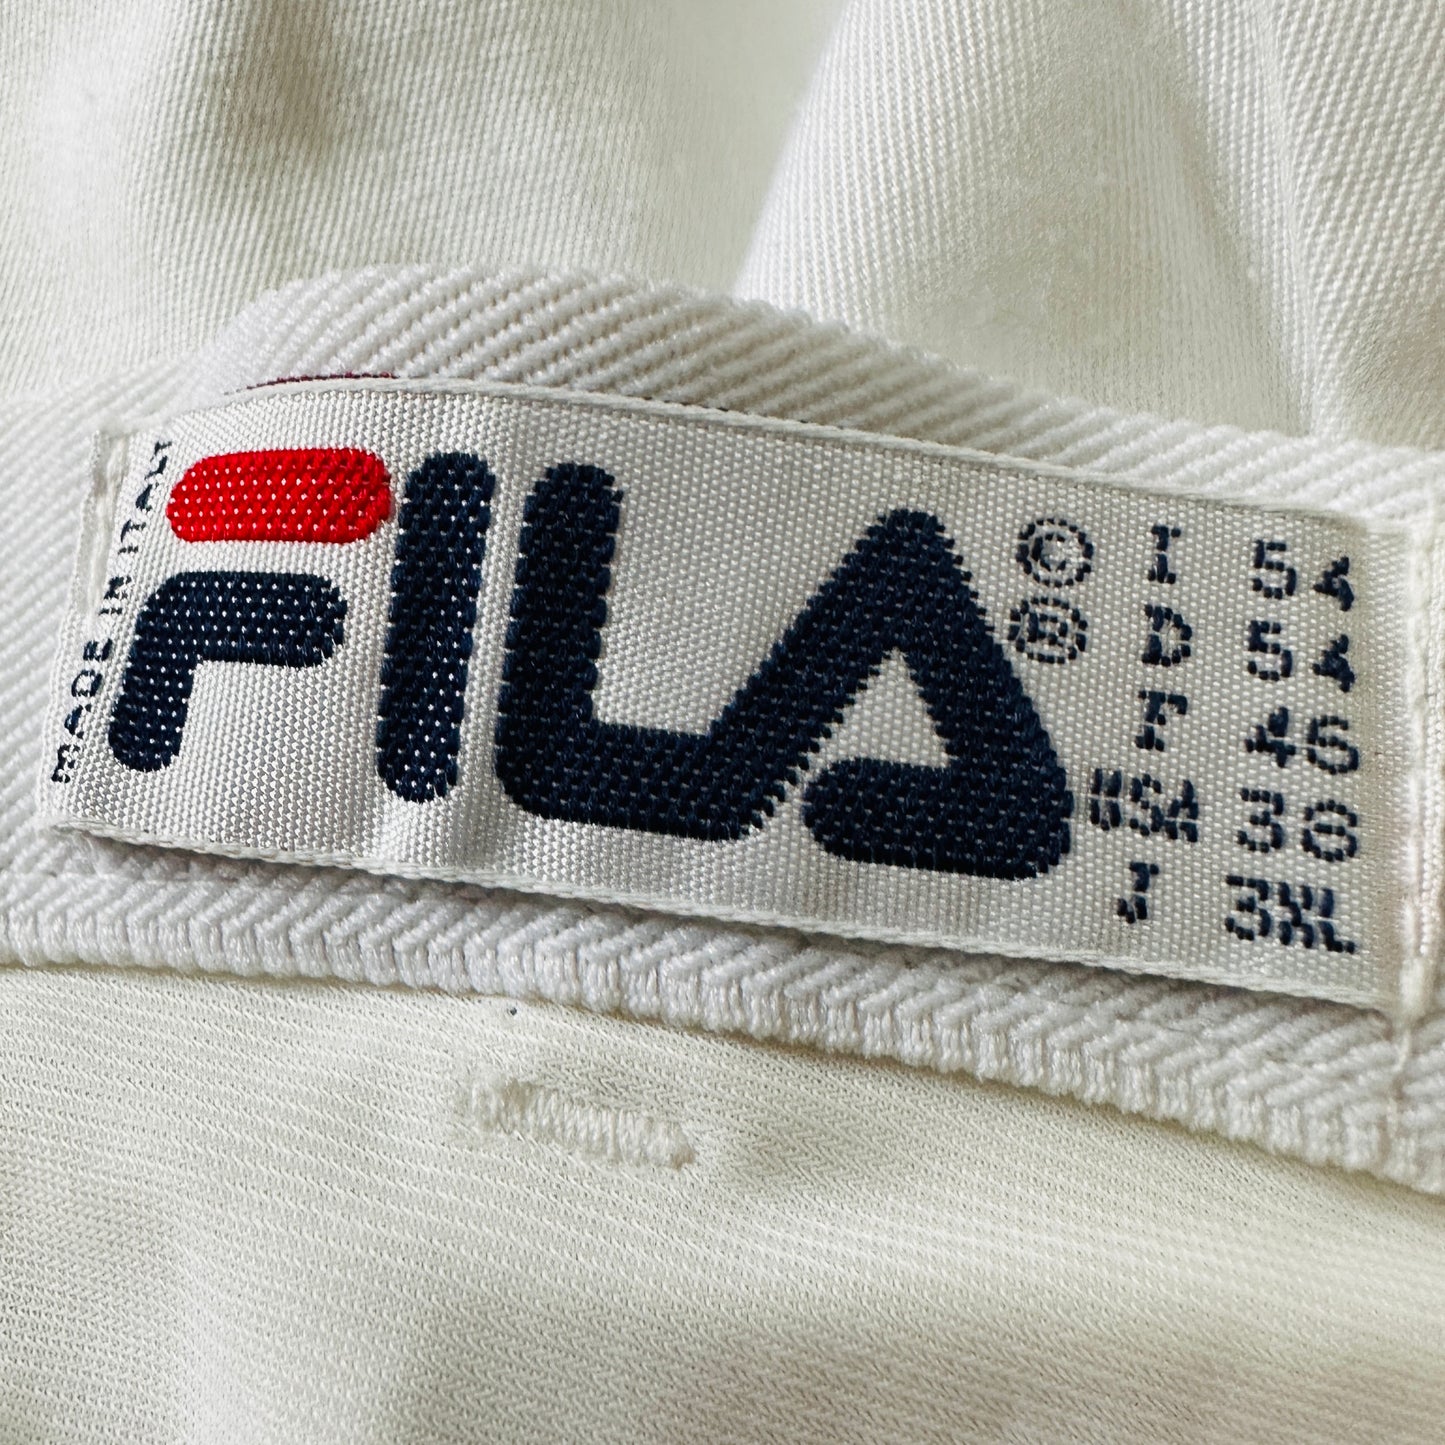 Fila 80s Vintage Tennis Shorts - 54 / XL - Made in Italy